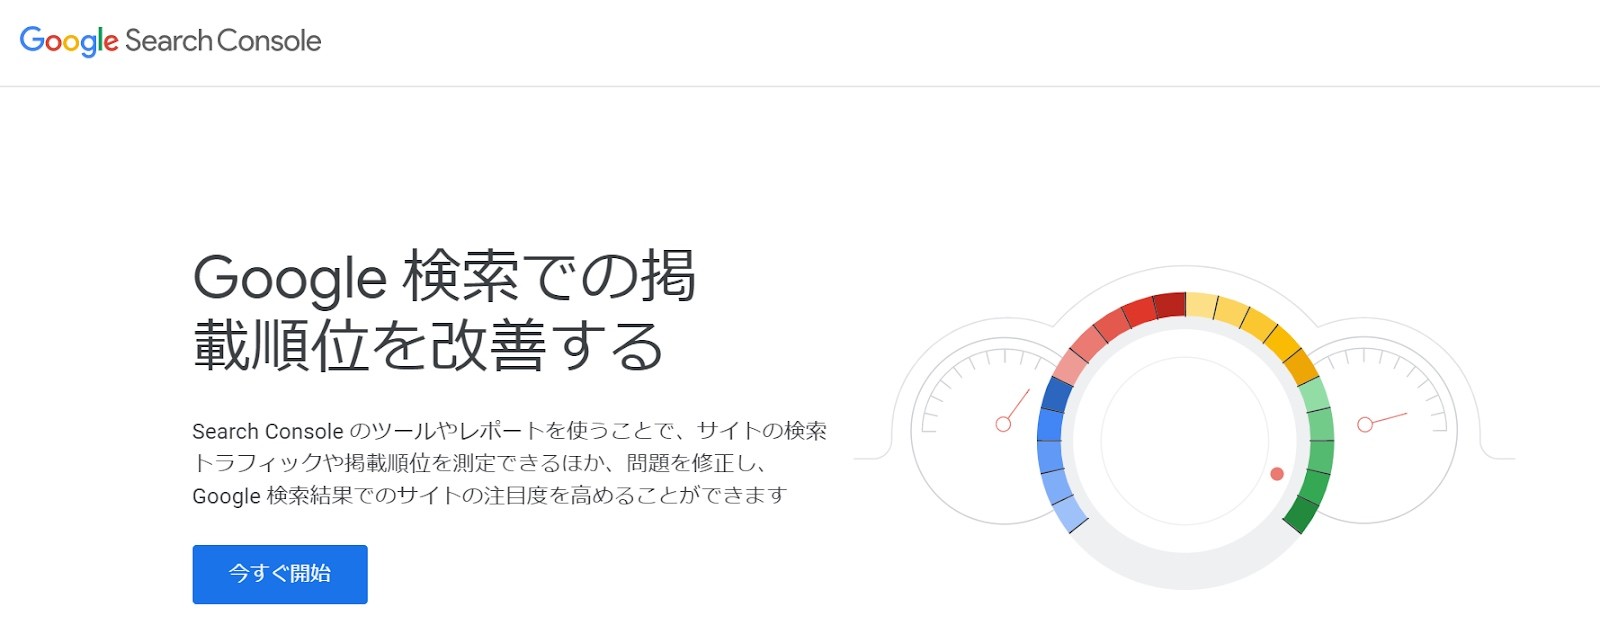 Google Search Consoleトップ